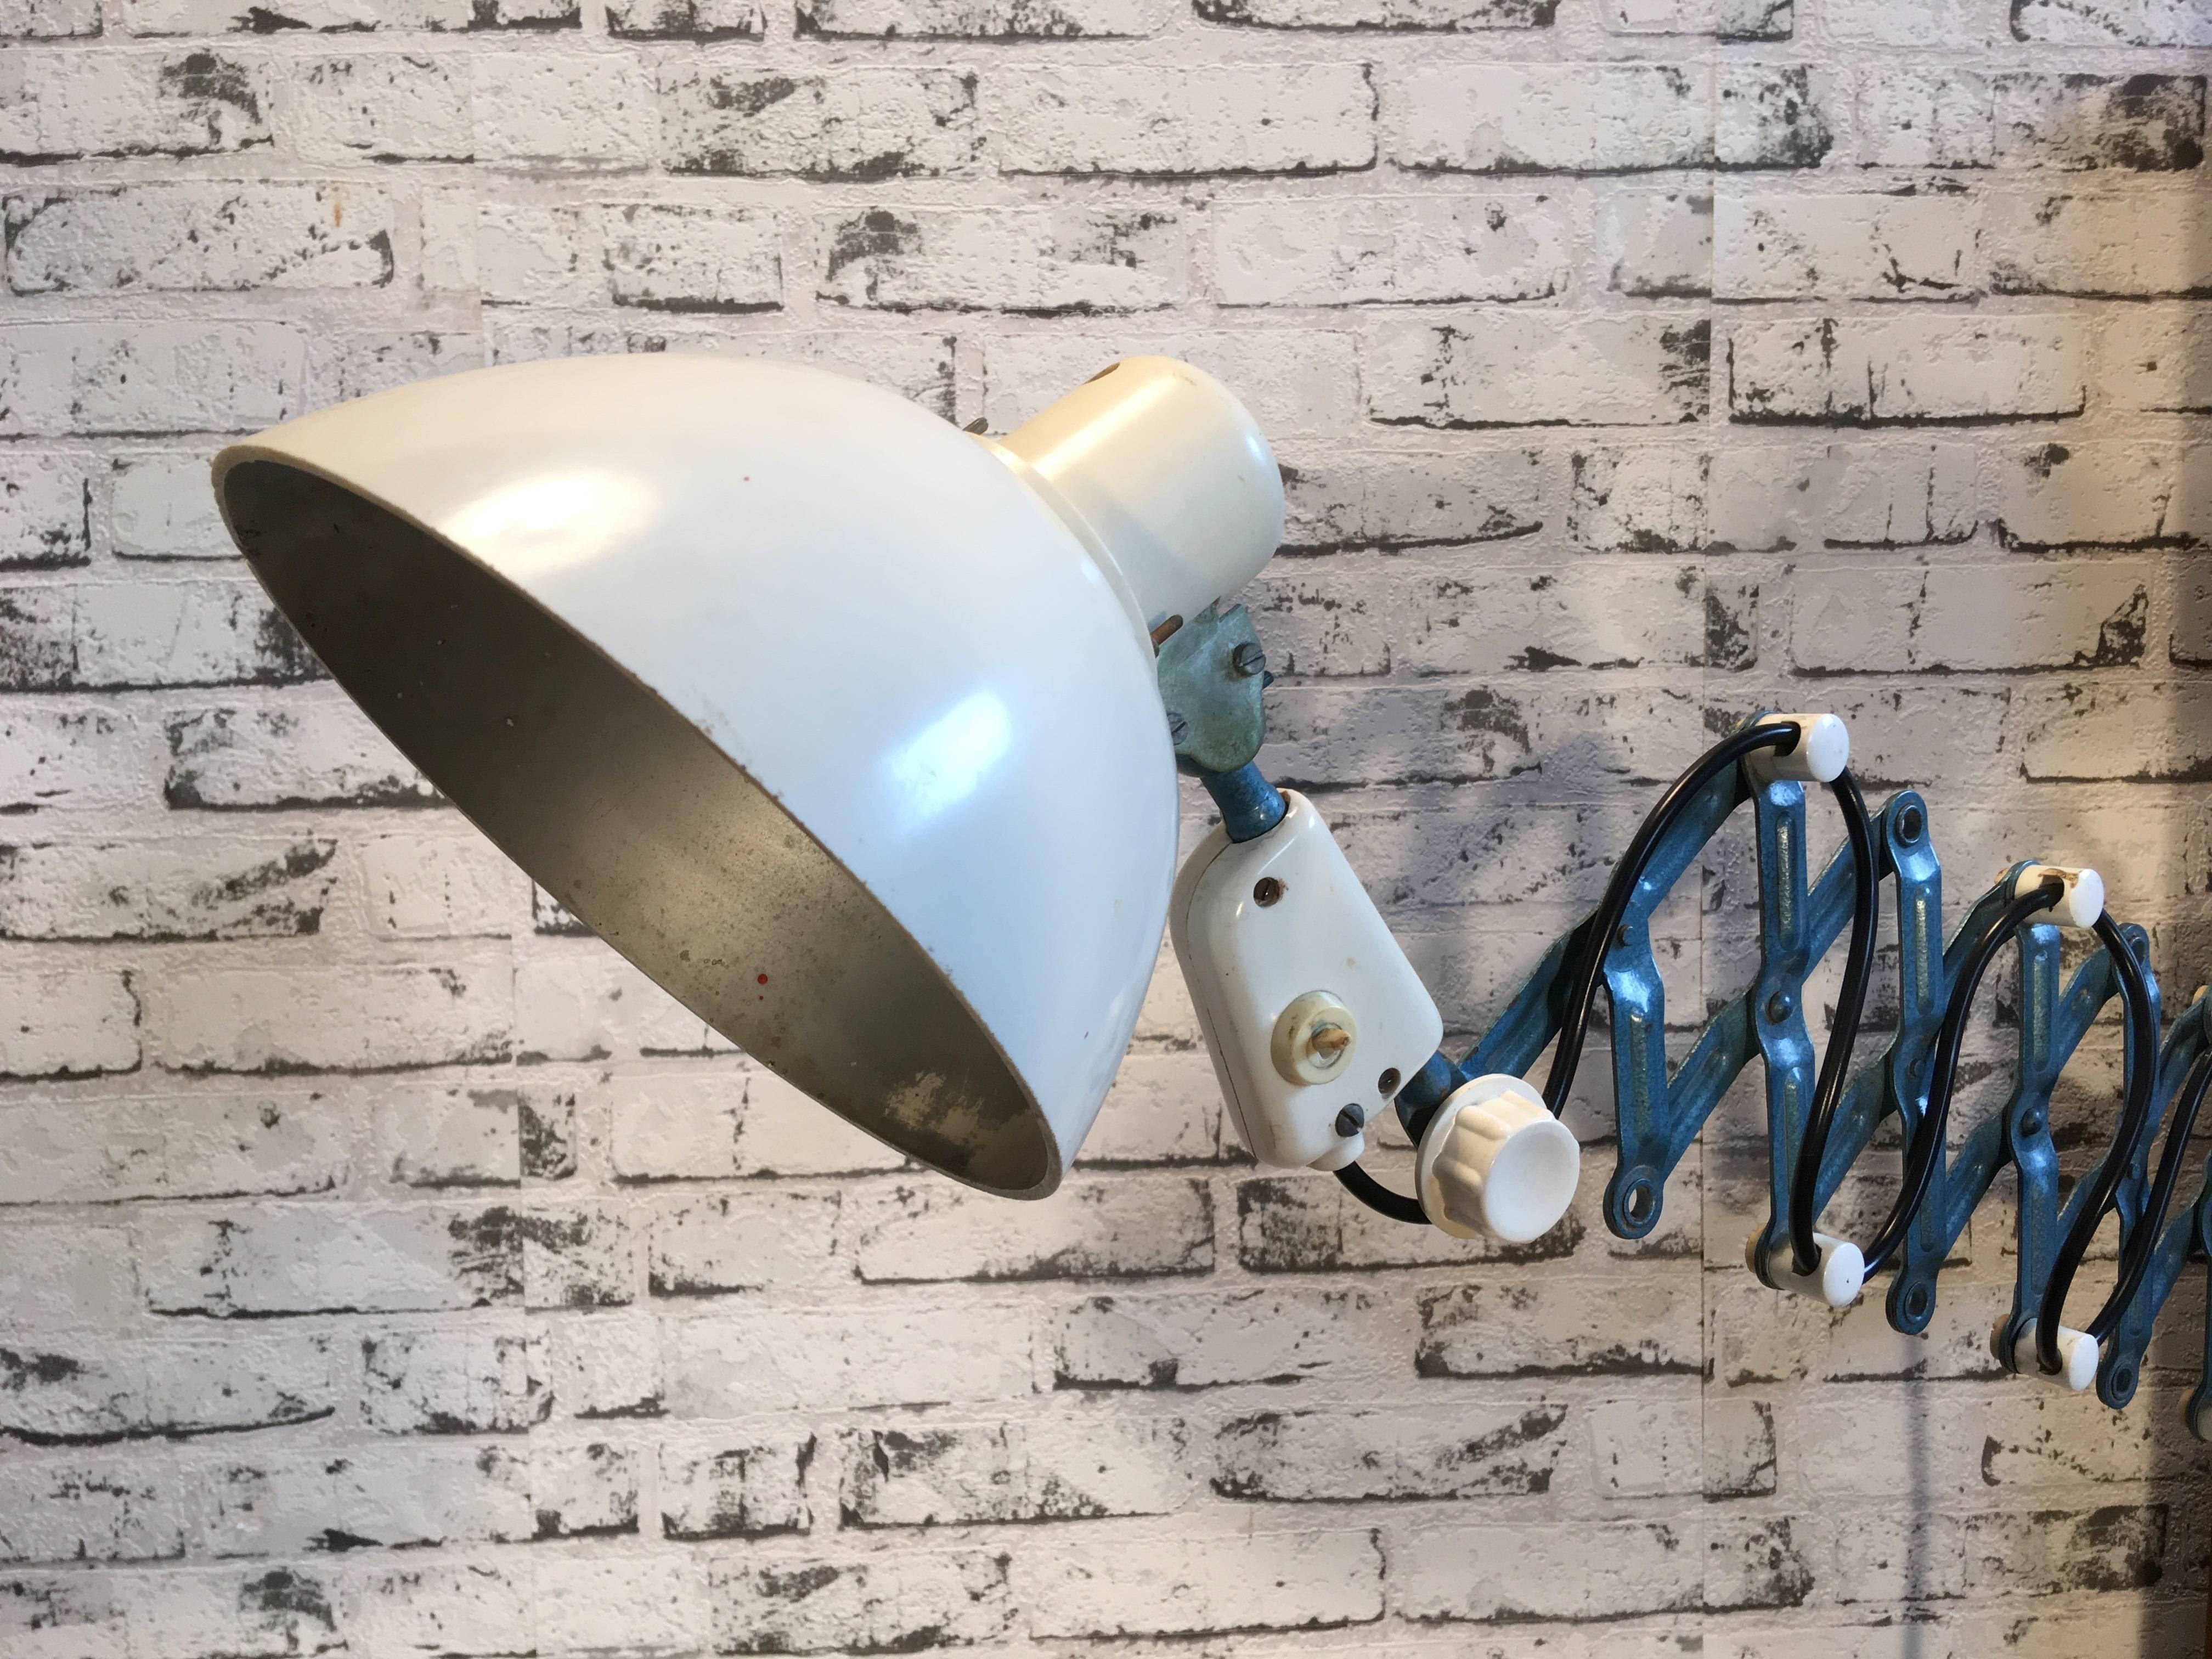 This vintage industrial scissor lamp was produced by Reif Dresden in former East Germany in the 1950s. Lamp has white bakelite shade. Blue iron scissor arm is extendable and can be turned sideways. Fully functional. Very nice vintage